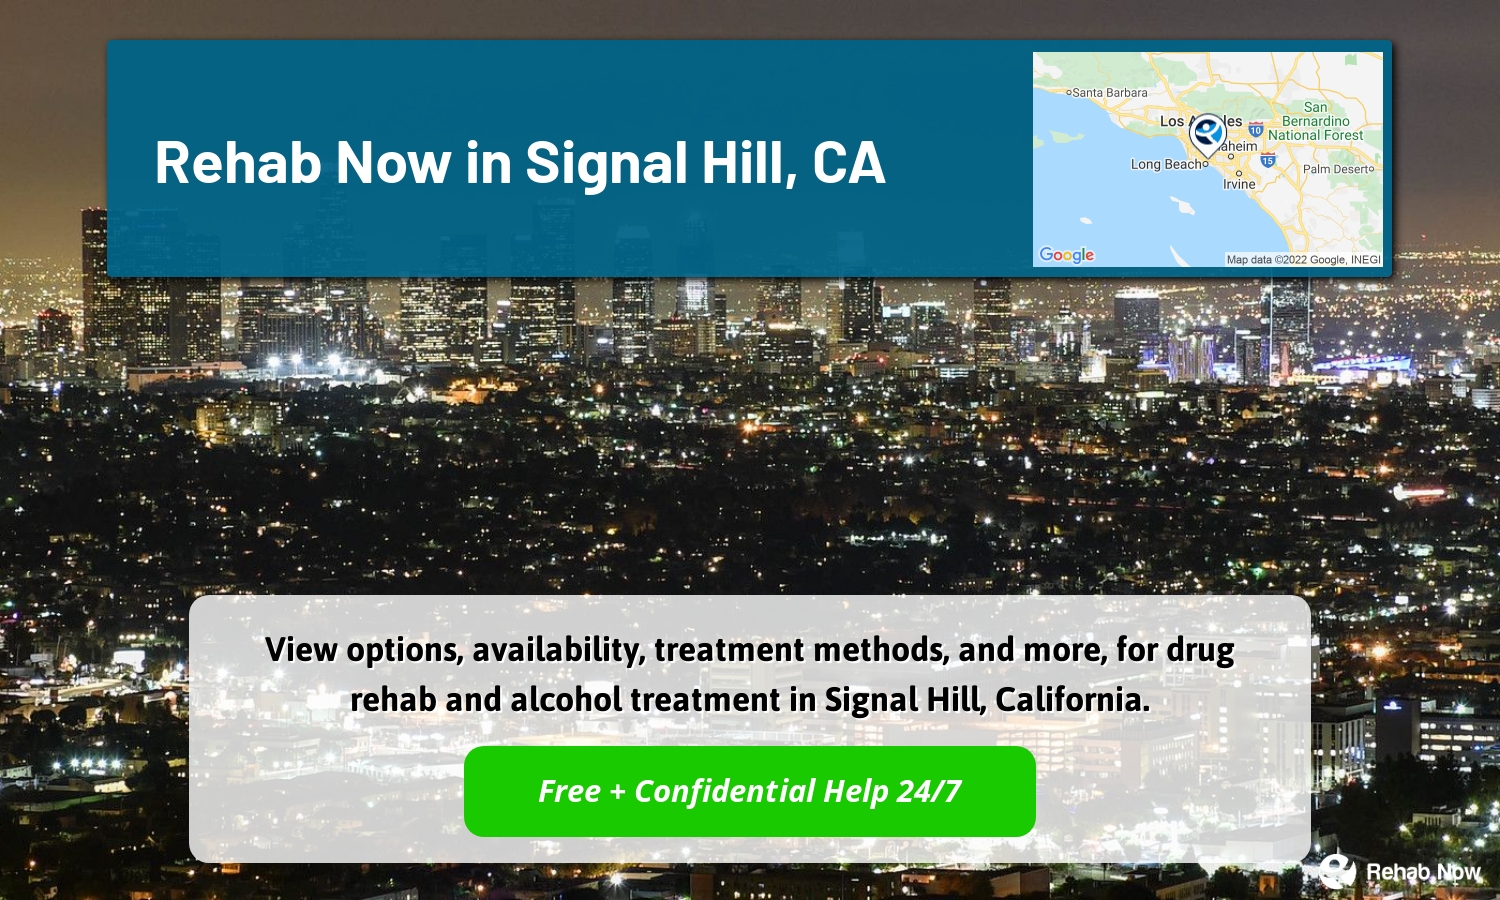 View options, availability, treatment methods, and more, for drug rehab and alcohol treatment in Signal Hill, California.